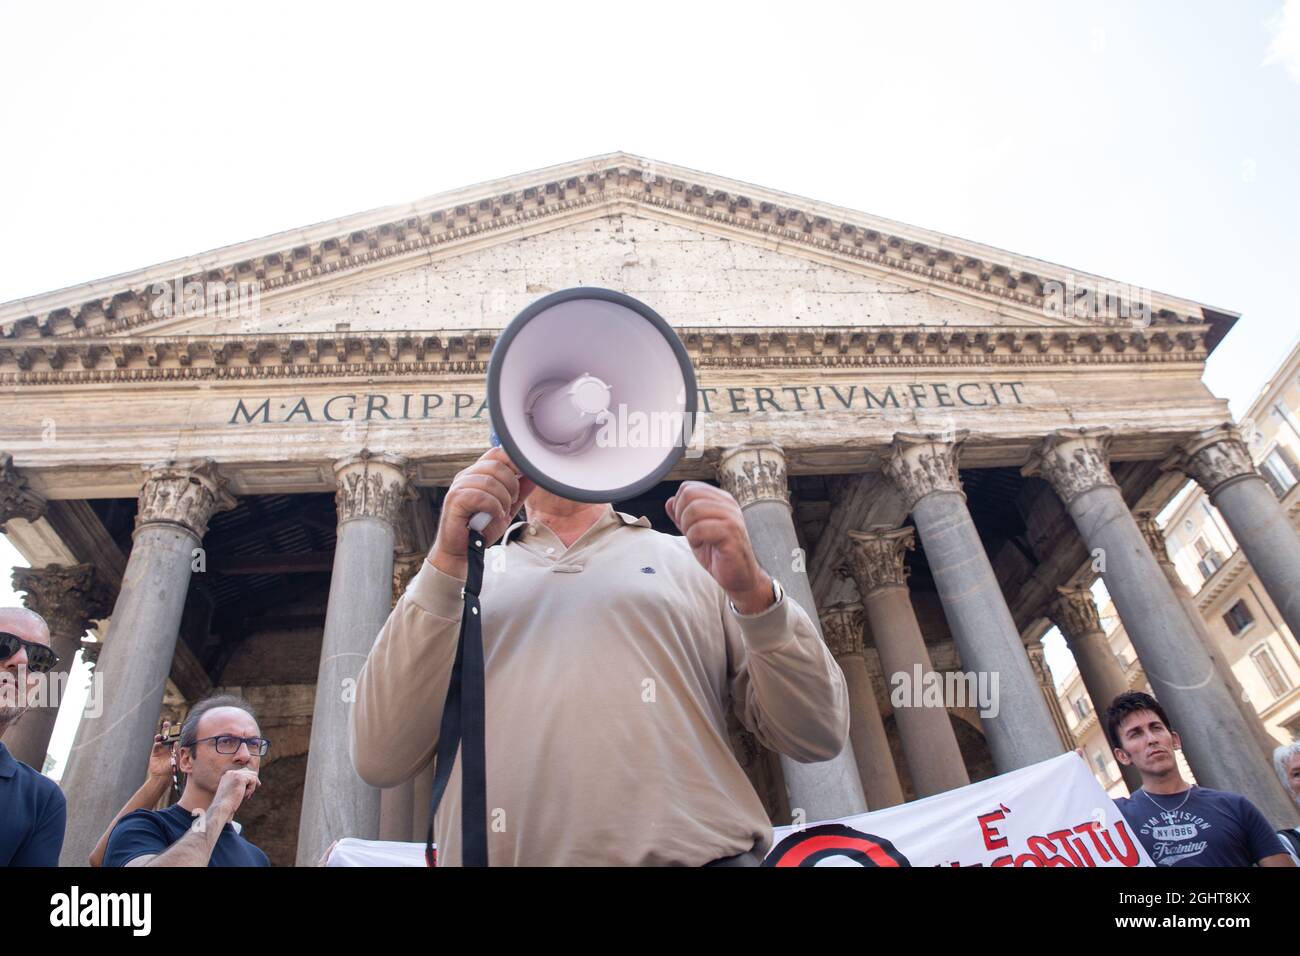 Roberto Fiore, leader of Forza Nuova. Demonstration organized by political movement Forza Nuova in front of Pantheon in Rome to protest against use of Green Pass decided by Italian Government. (Photo by Matteo Nardone/Pacific Press/Sipa USA) Stock Photo